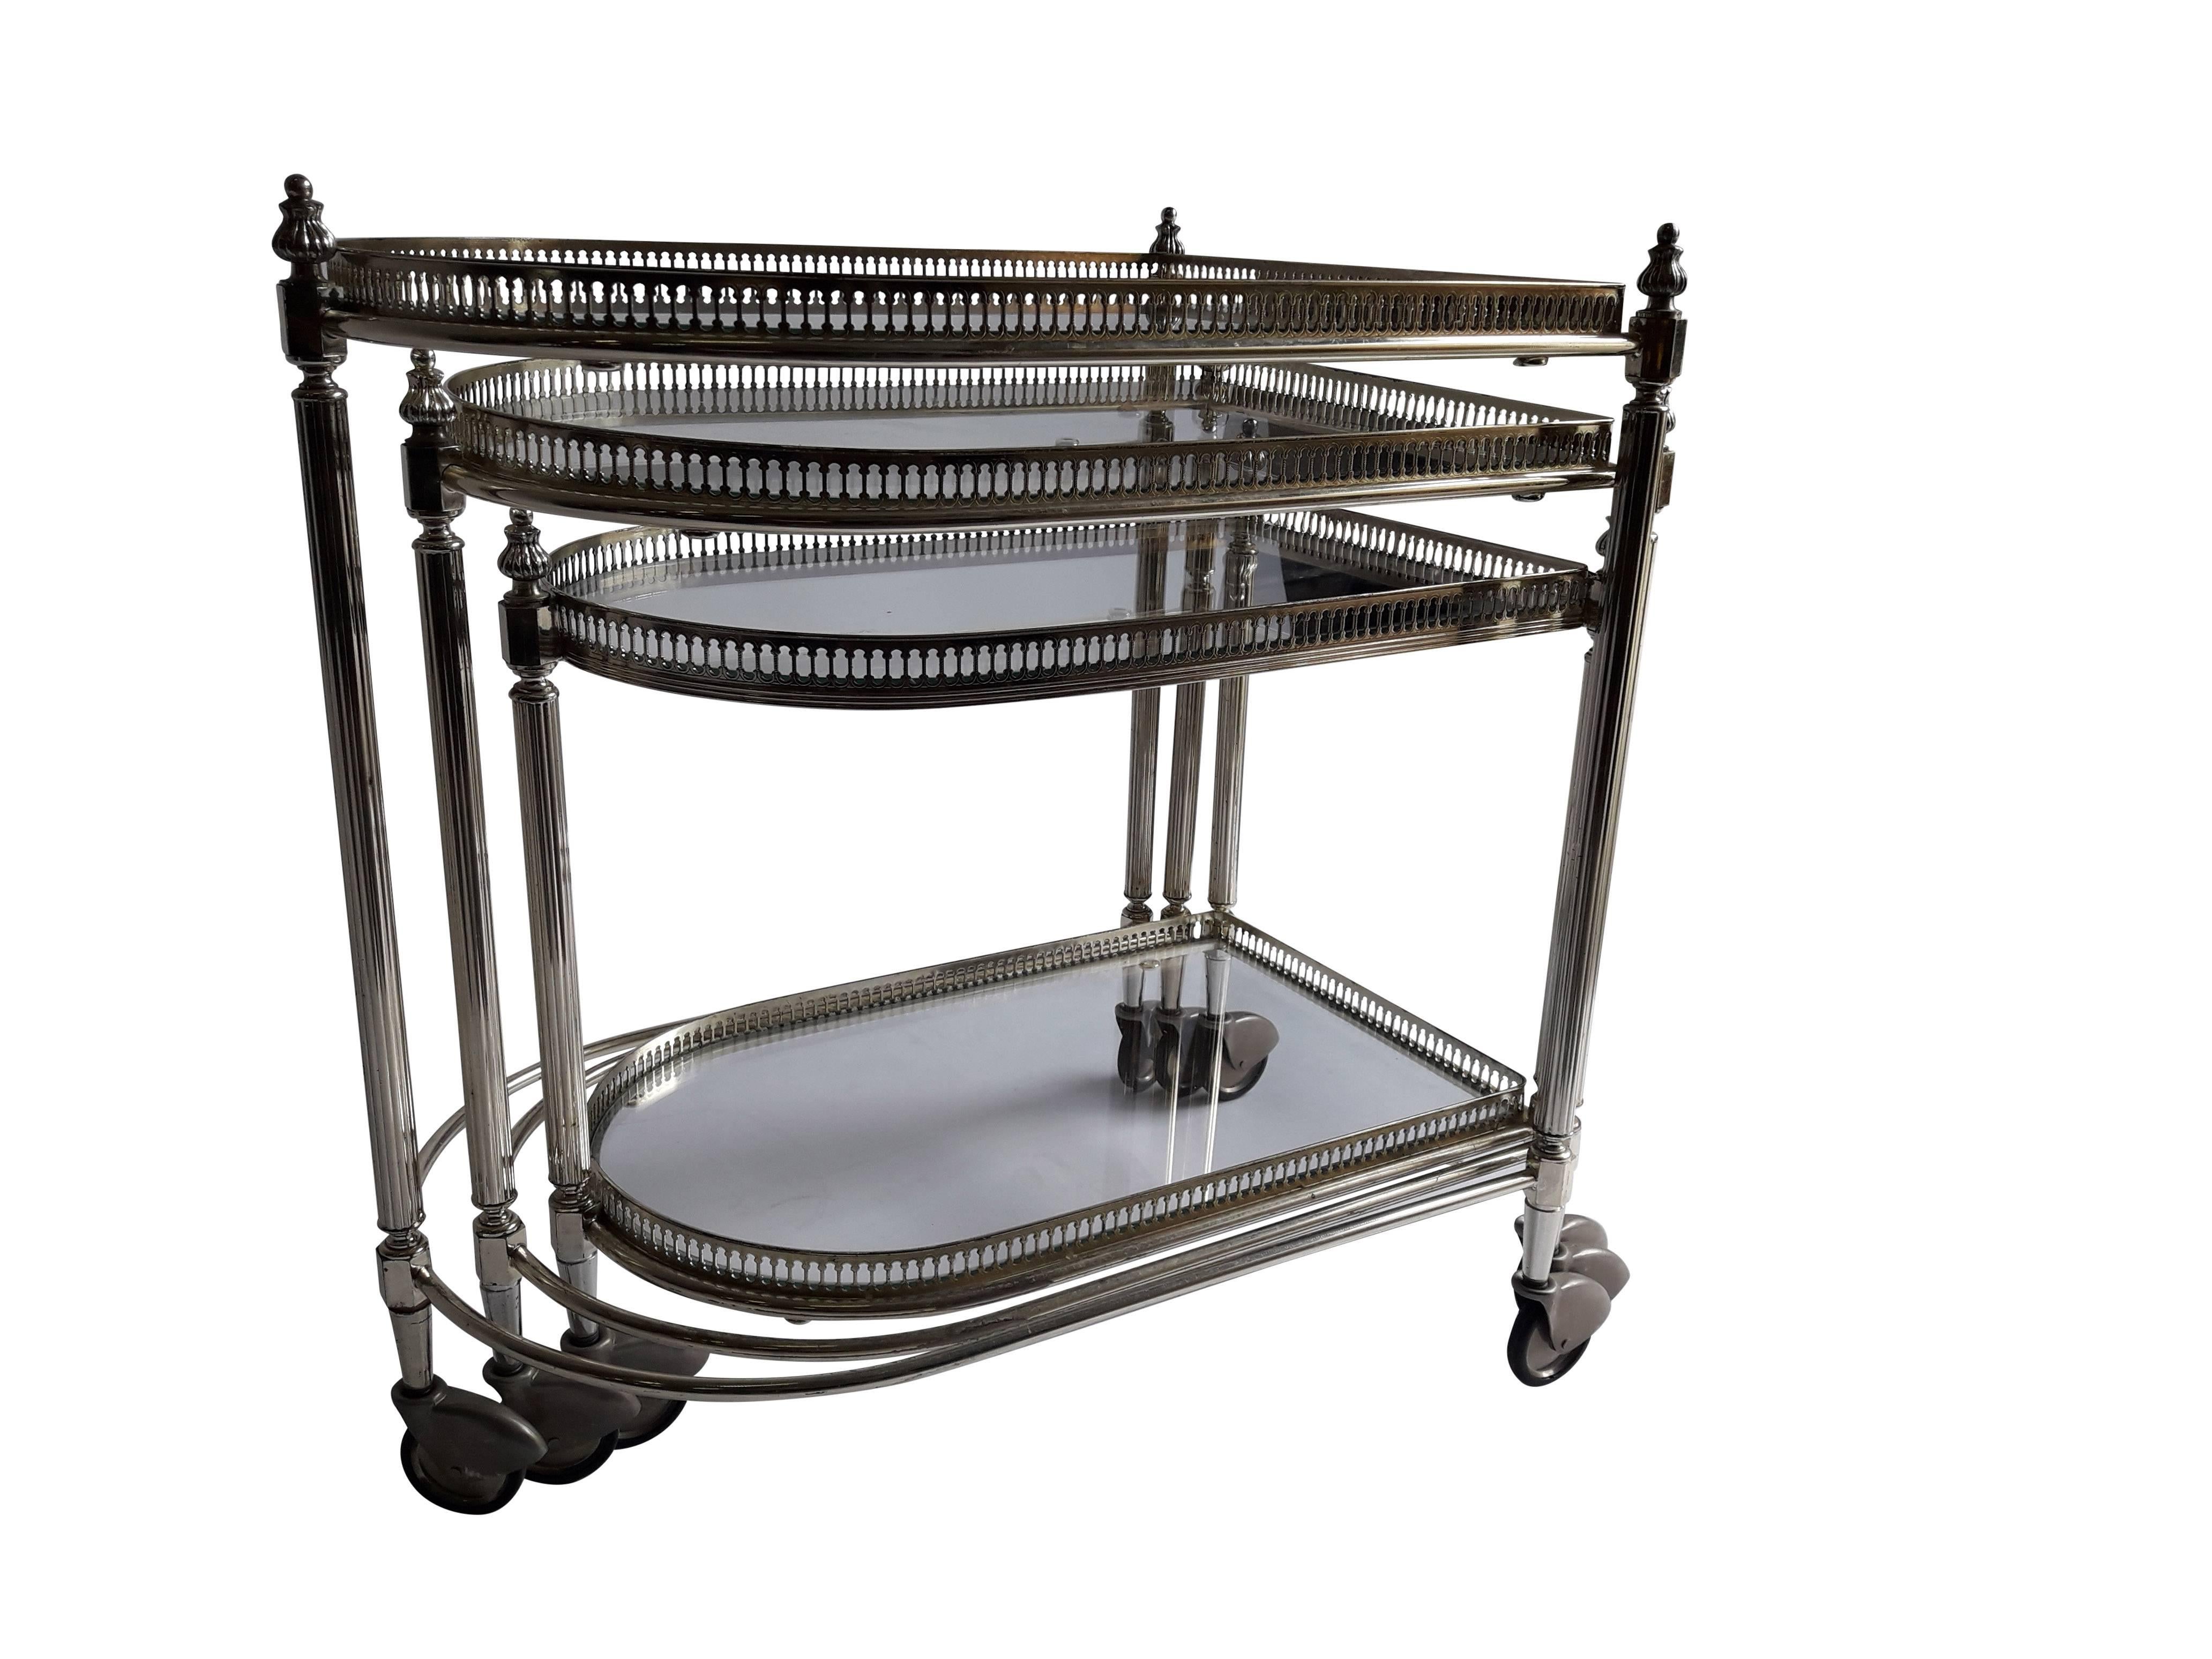 Set of three chrome nesting tables in the style of Maison Jansen, Italy
This amazing set of nesting tables are very much in the style of pieces created by Maison Jansen and date from the 1960s-1970s. 

Note: 
Dimension to top of rail on tallest